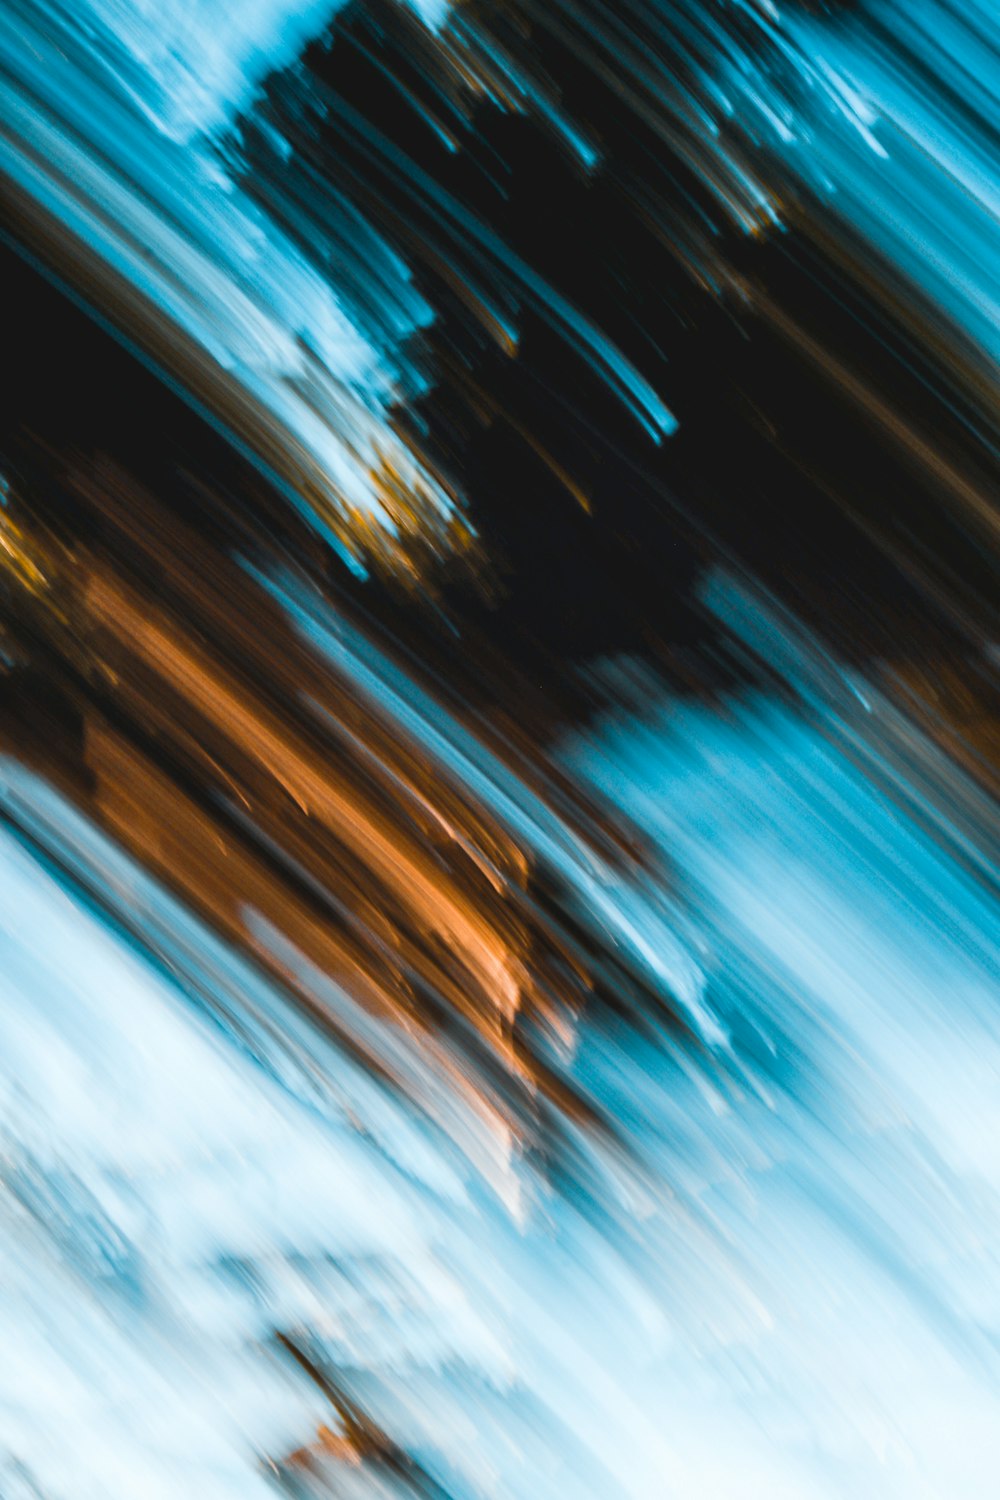 a blurry photo of a snowboarder going down a hill